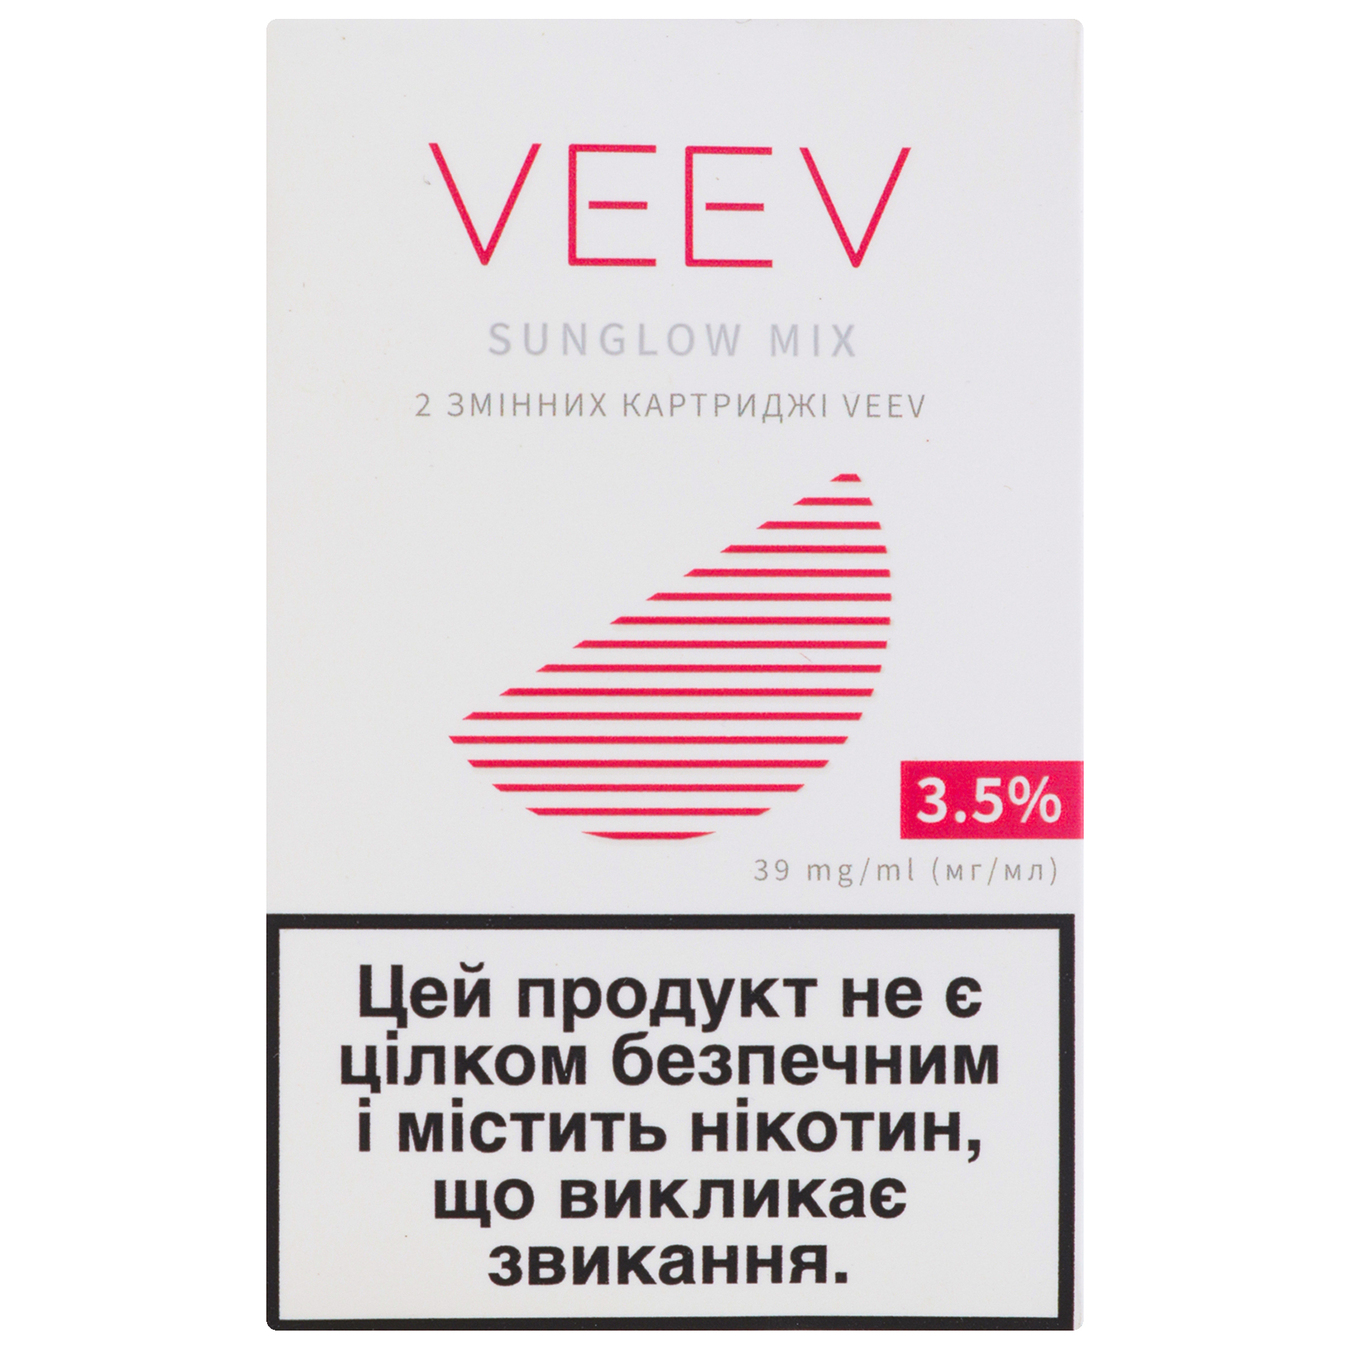 Replacement cartridge Veev Sunglov mix 3.5% (the price is without excise duty)